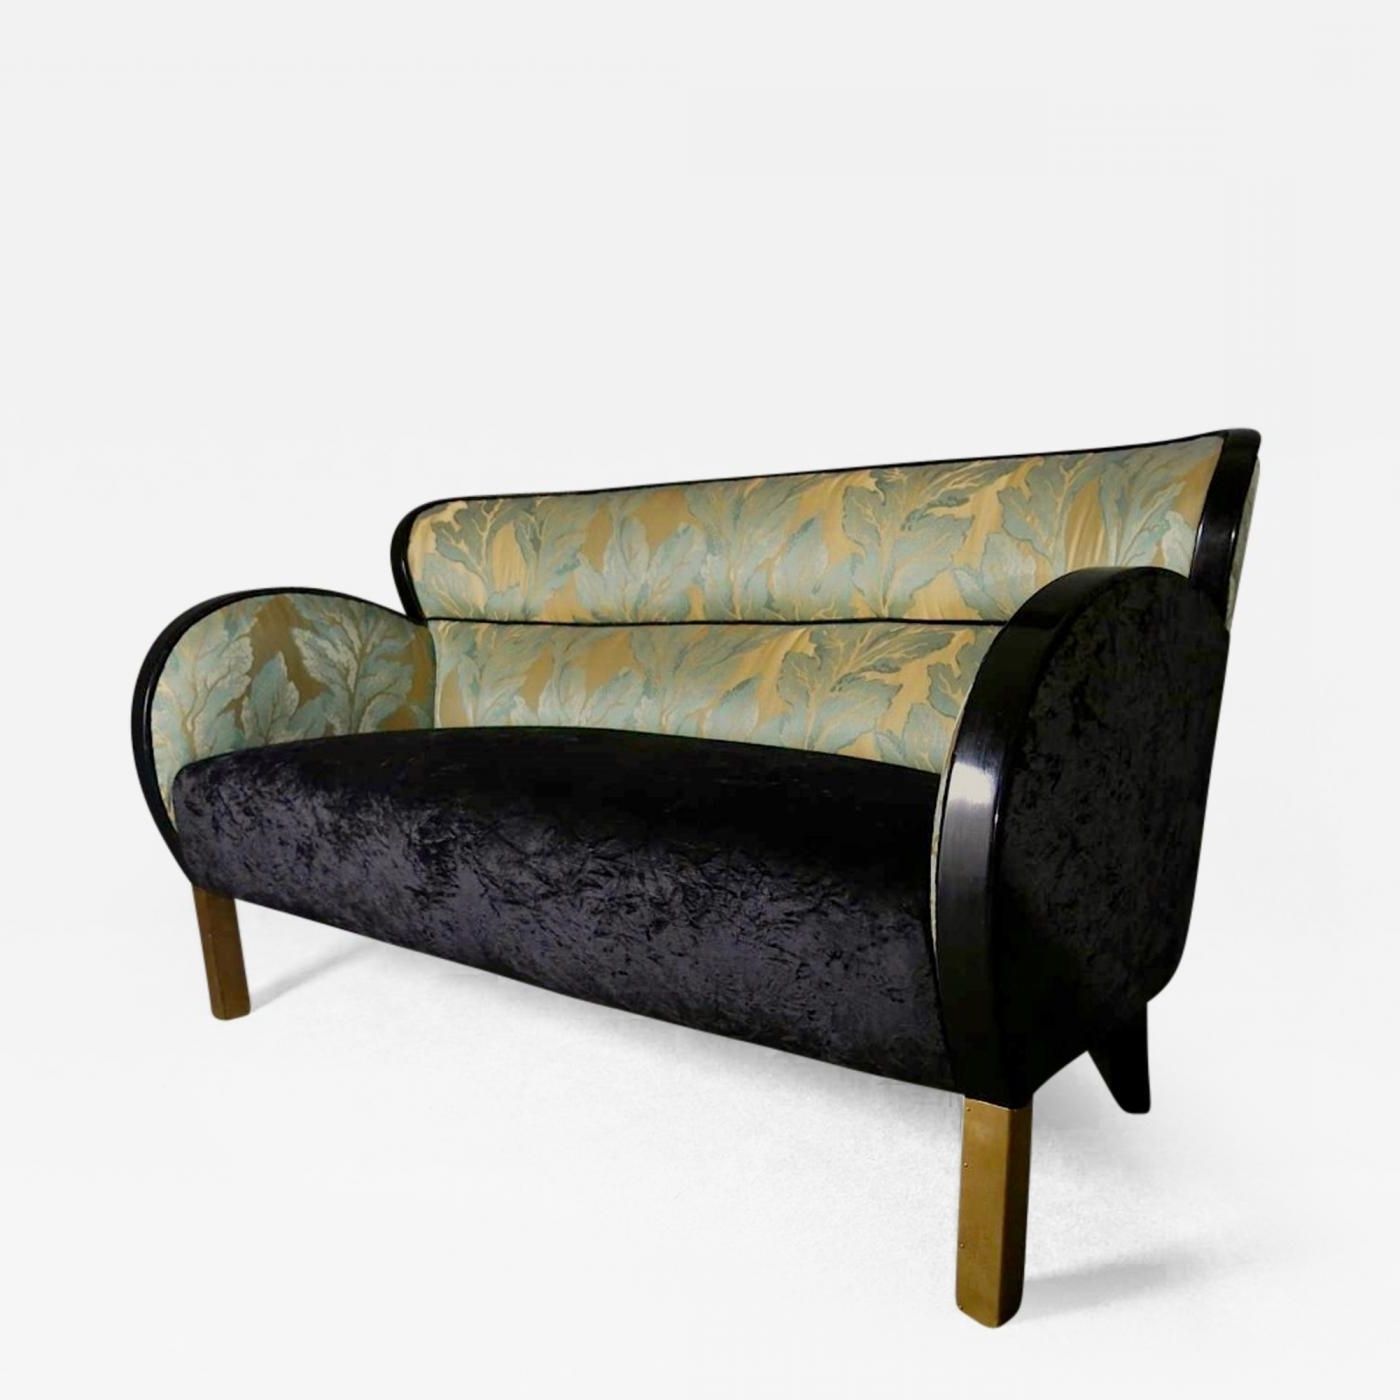 Art Deco Sofa In Black Velvet And Green Damask Fabric, Italy 1920S With Widely Used Art Deco Sofas (View 8 of 15)